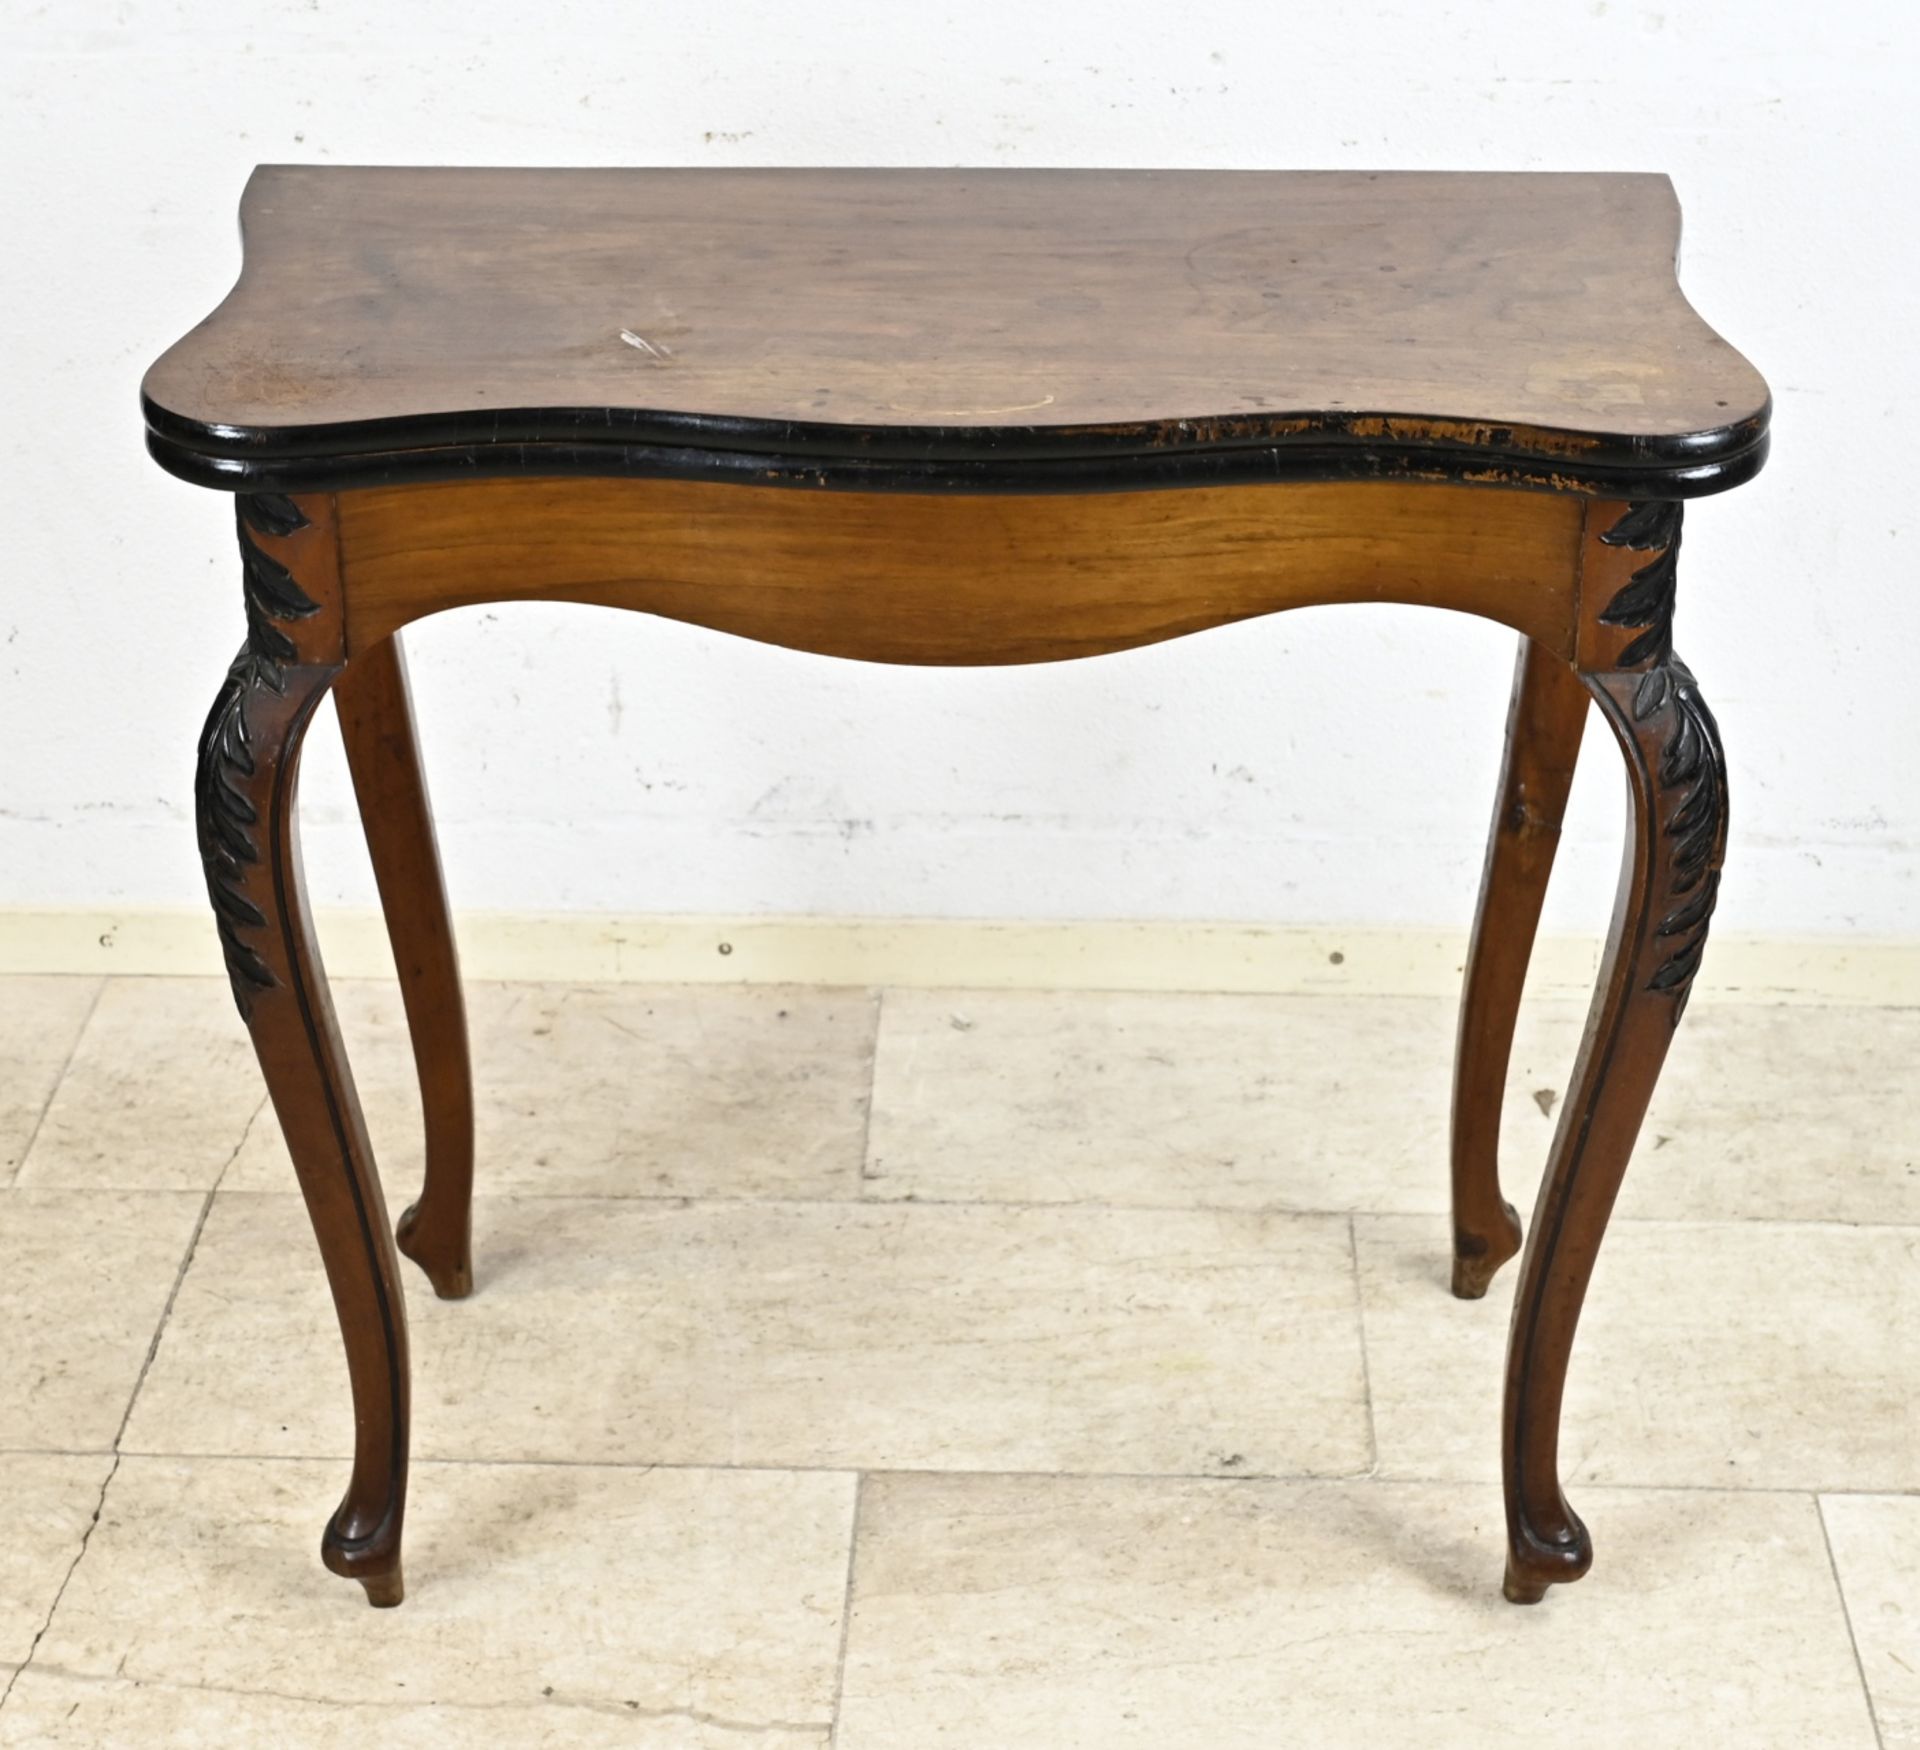 Antique Dutch gaming table